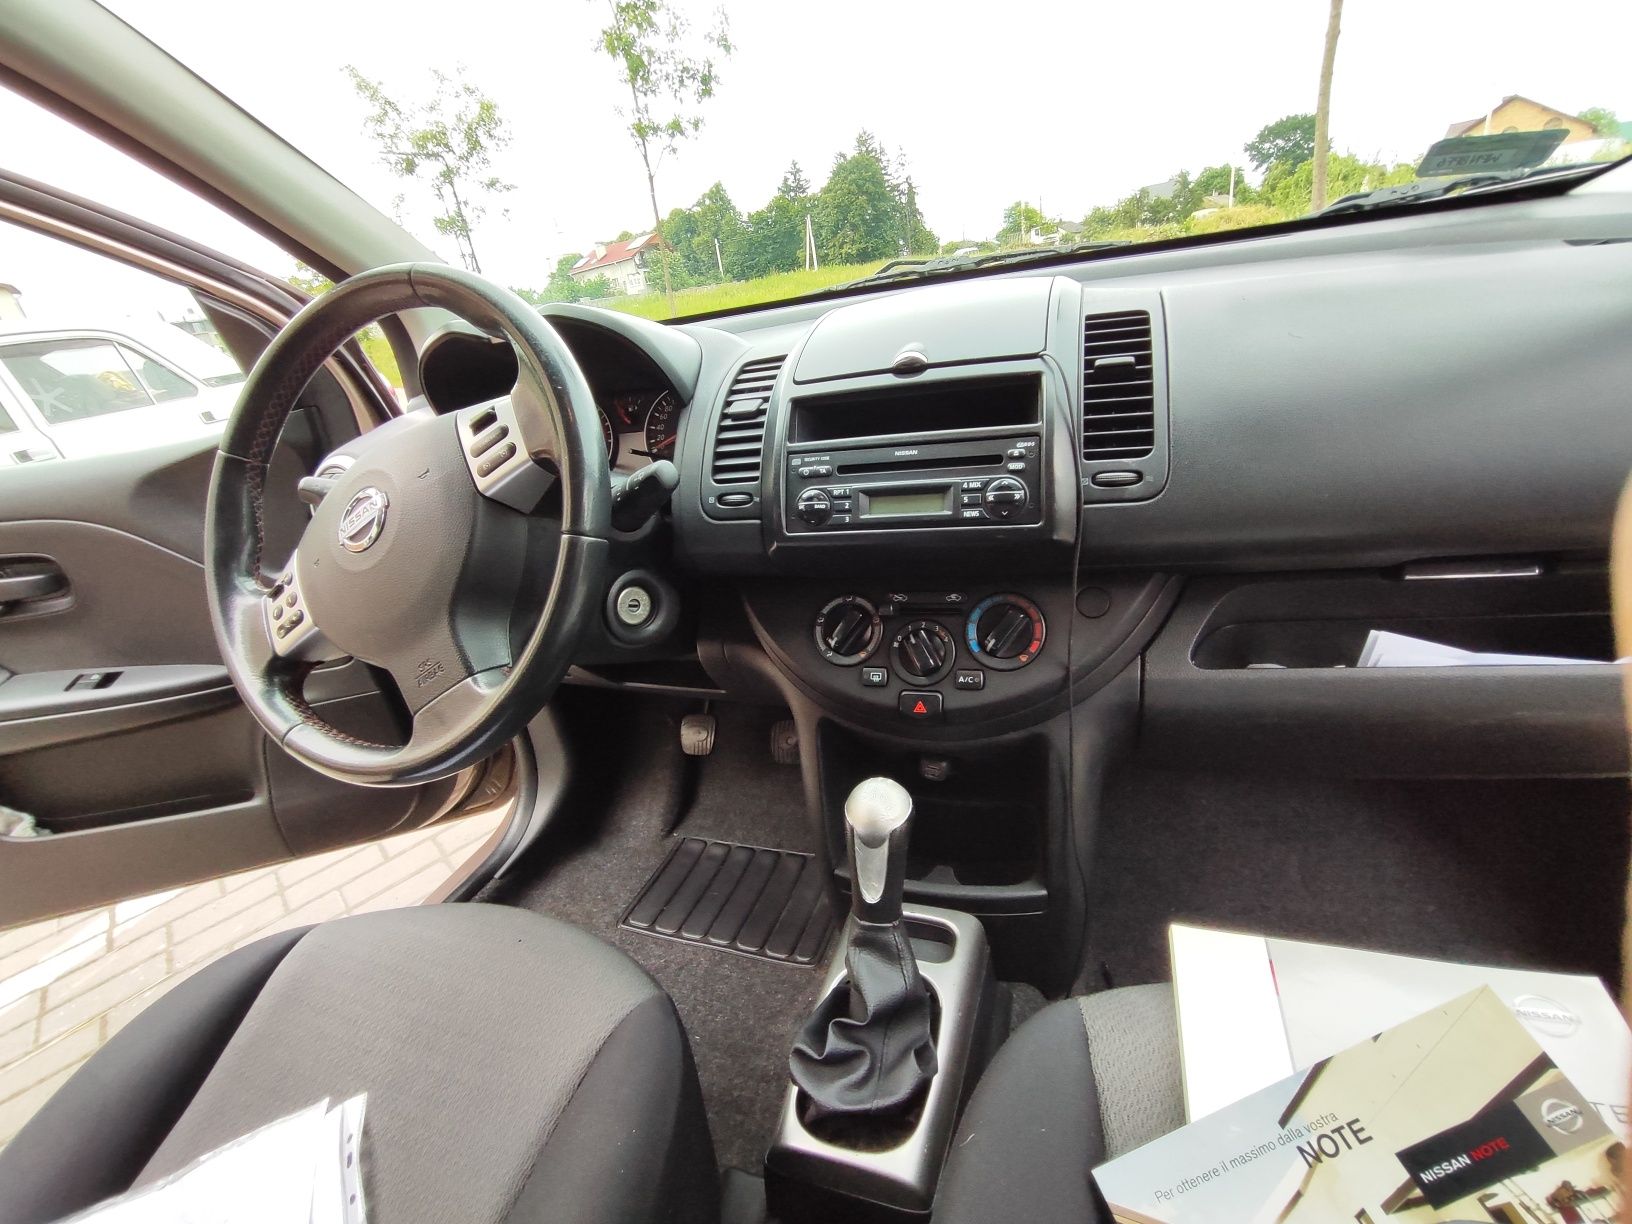 Nissan Note 1.4 2009 рік